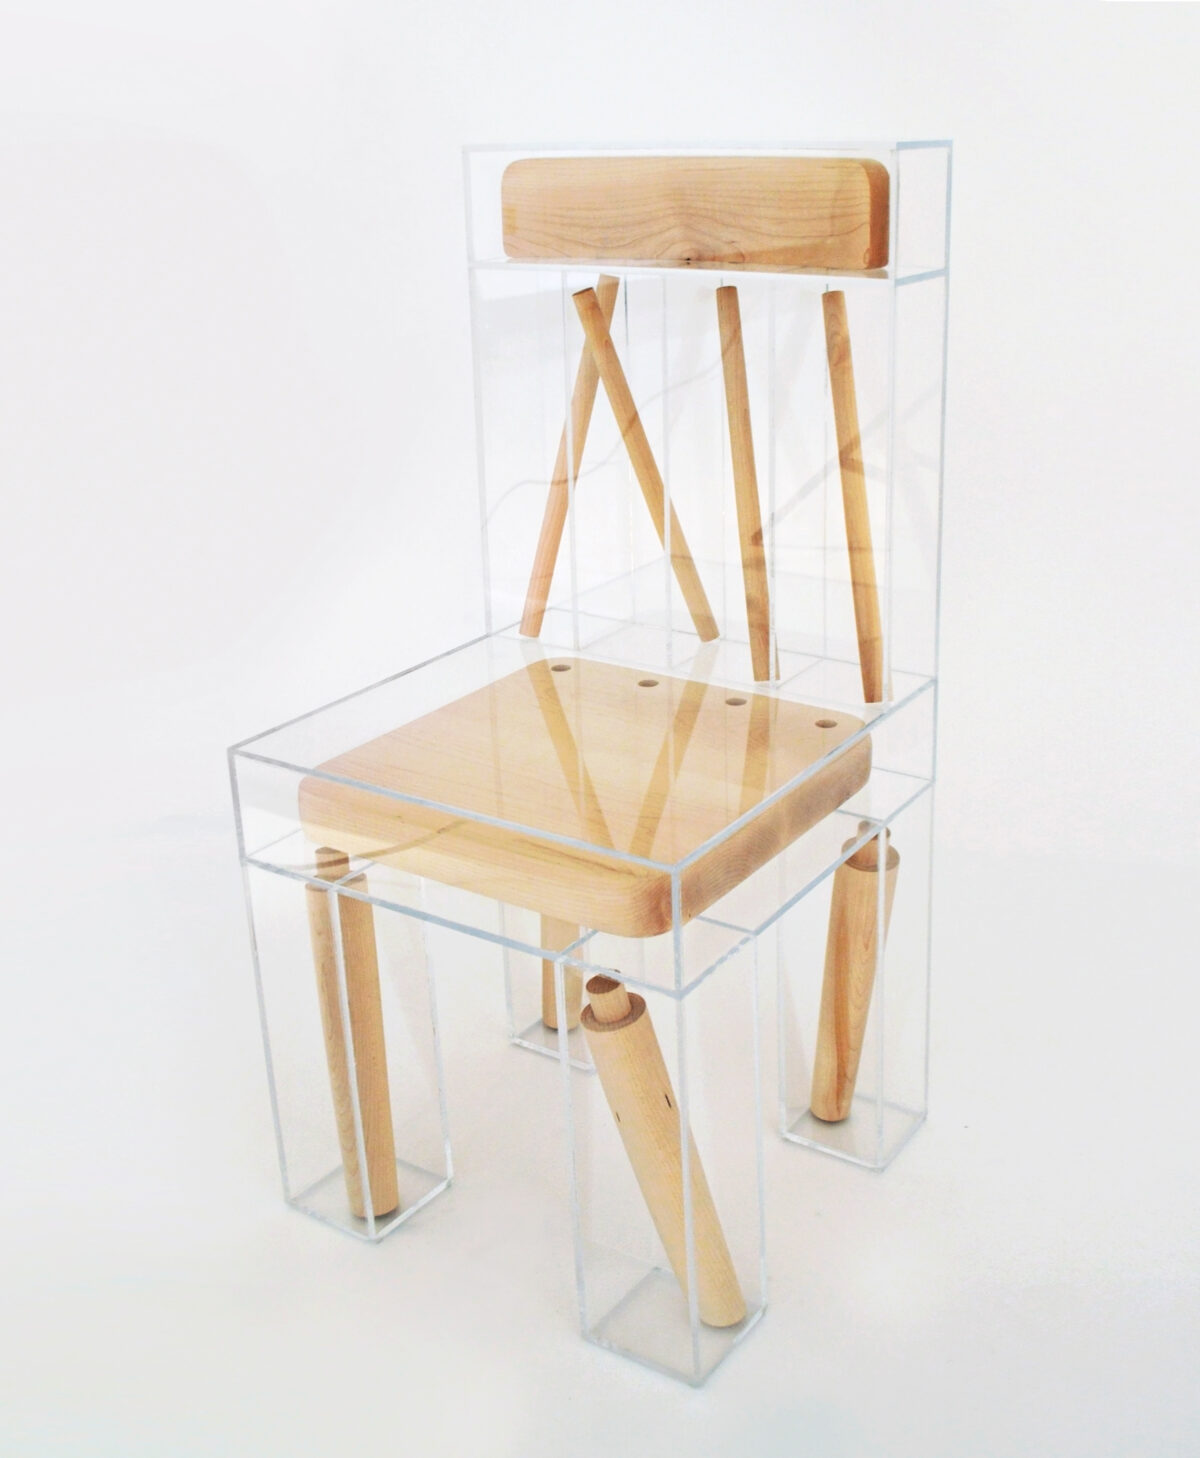 Exploded Chair An Intriguing And Interesting Furniture Design By Joyce Lin 4